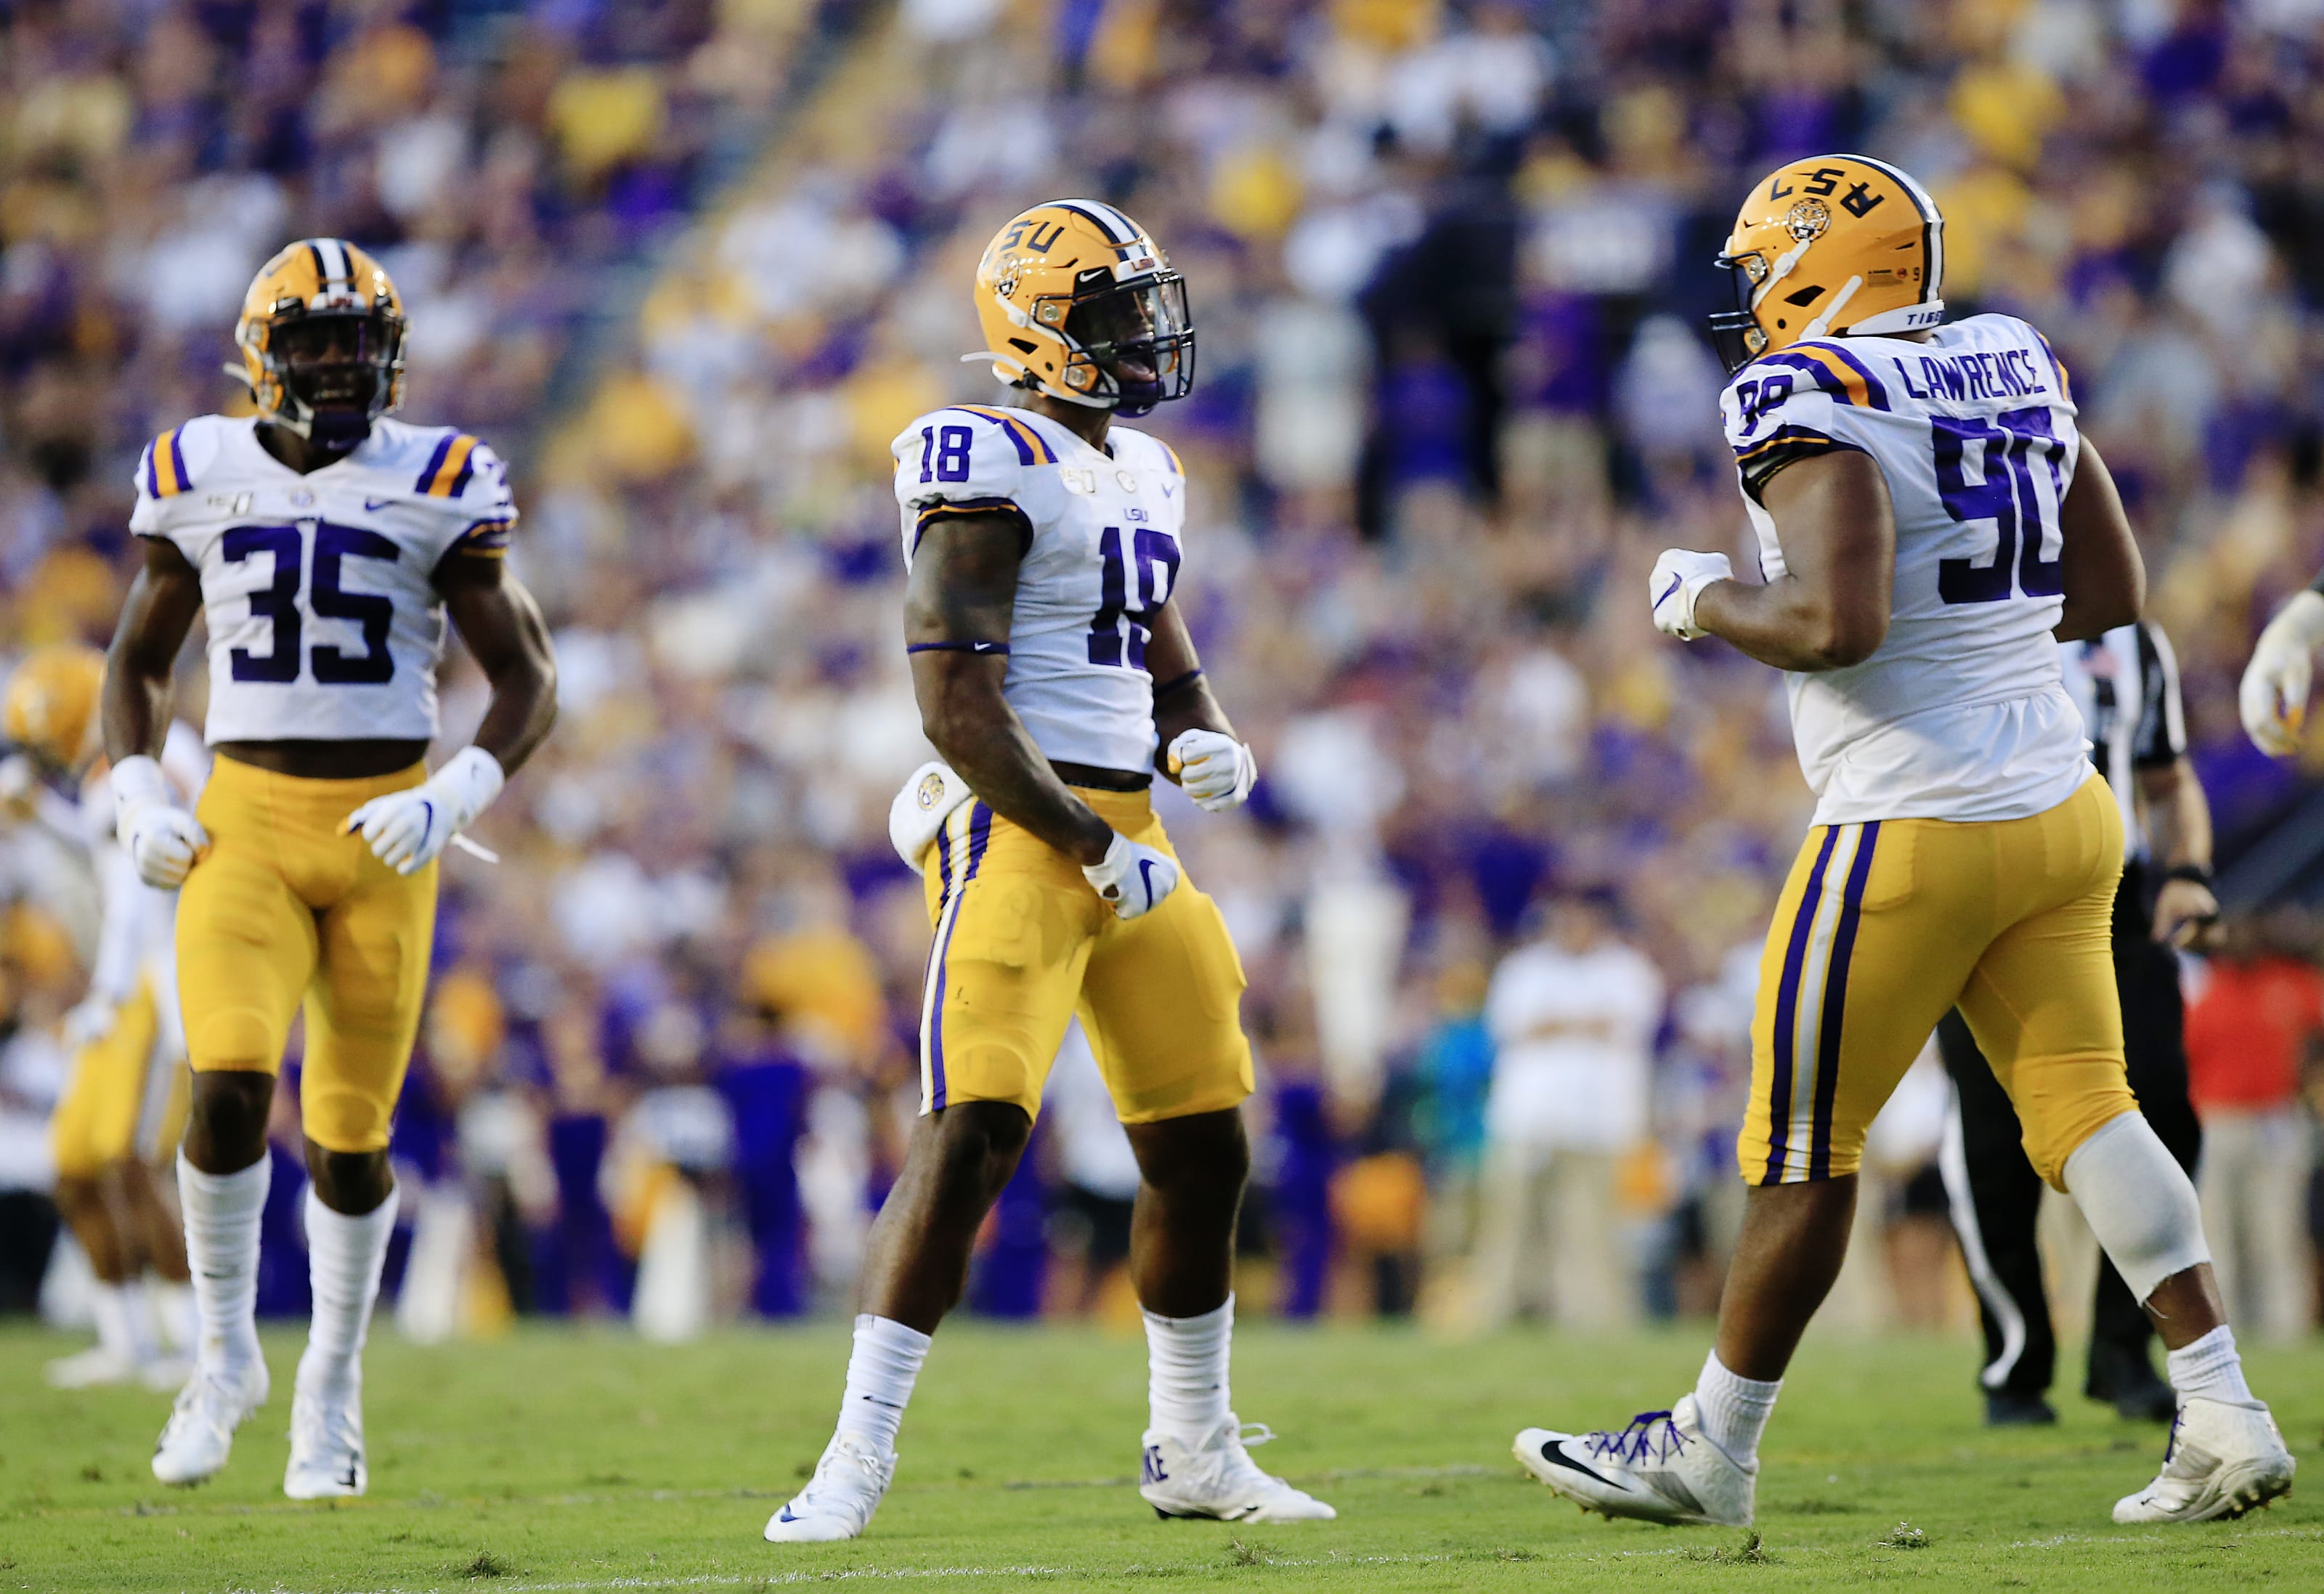 LSU Football: K'Lavon Chaisson has tools to be elite NFL pass